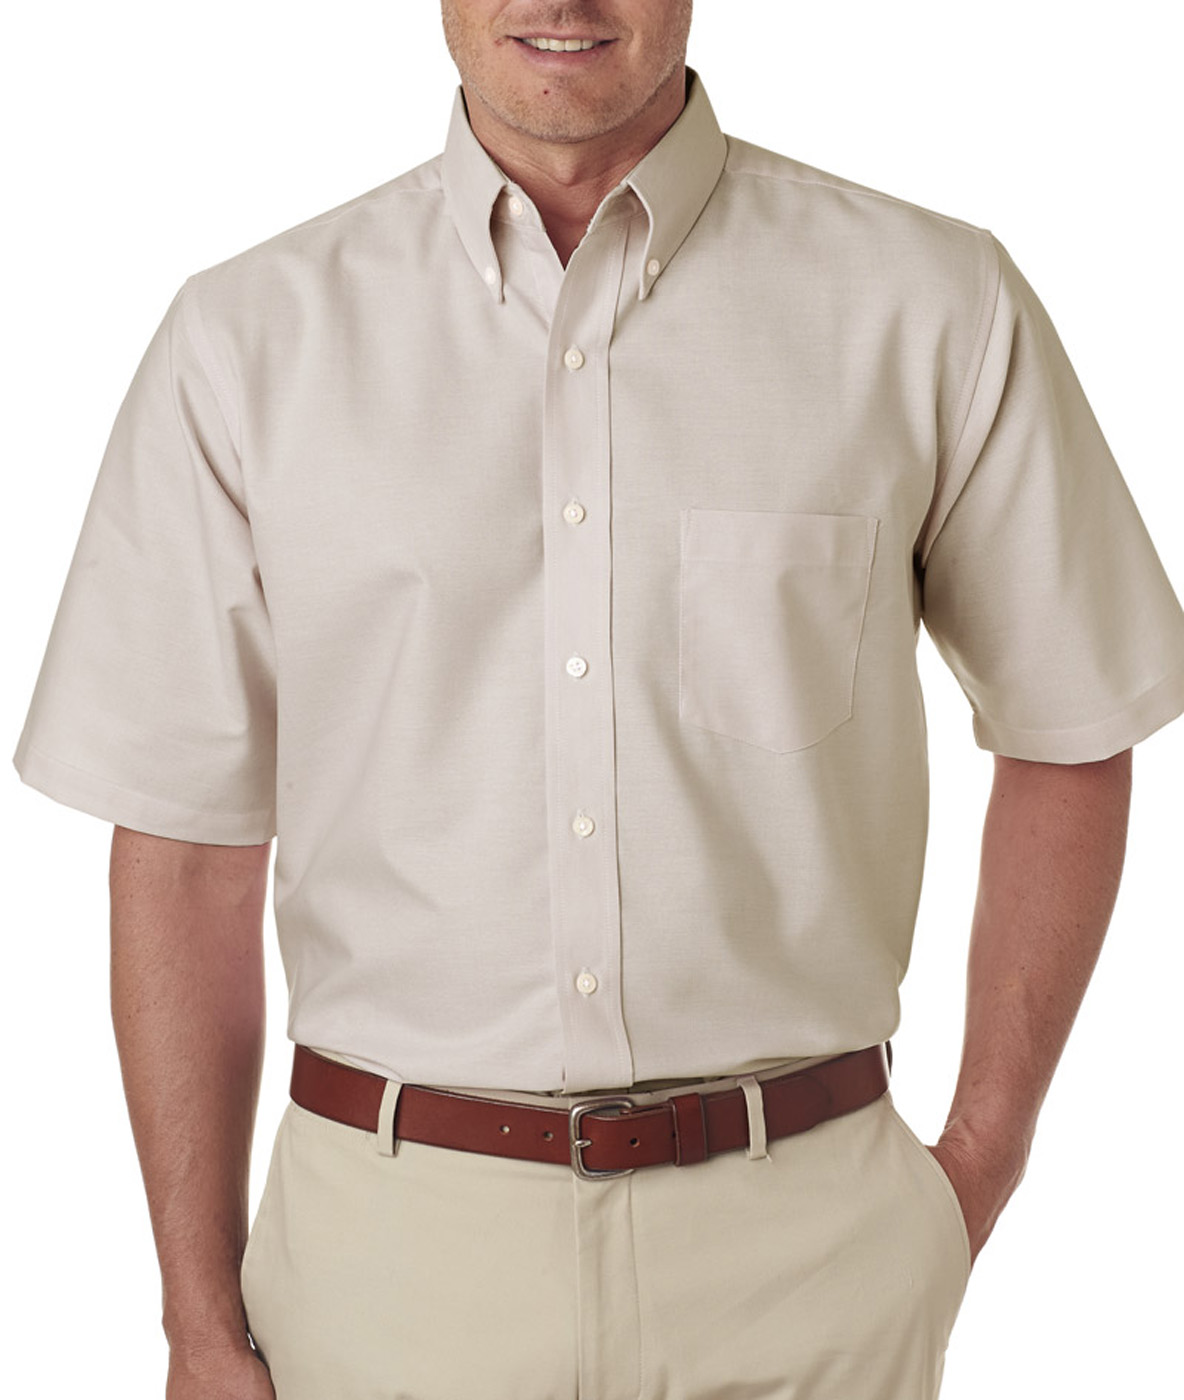 Ultraclub 8972 Men's Classic Wrinkle-Resistant Short-Sleeve Oxford - image 1 of 3